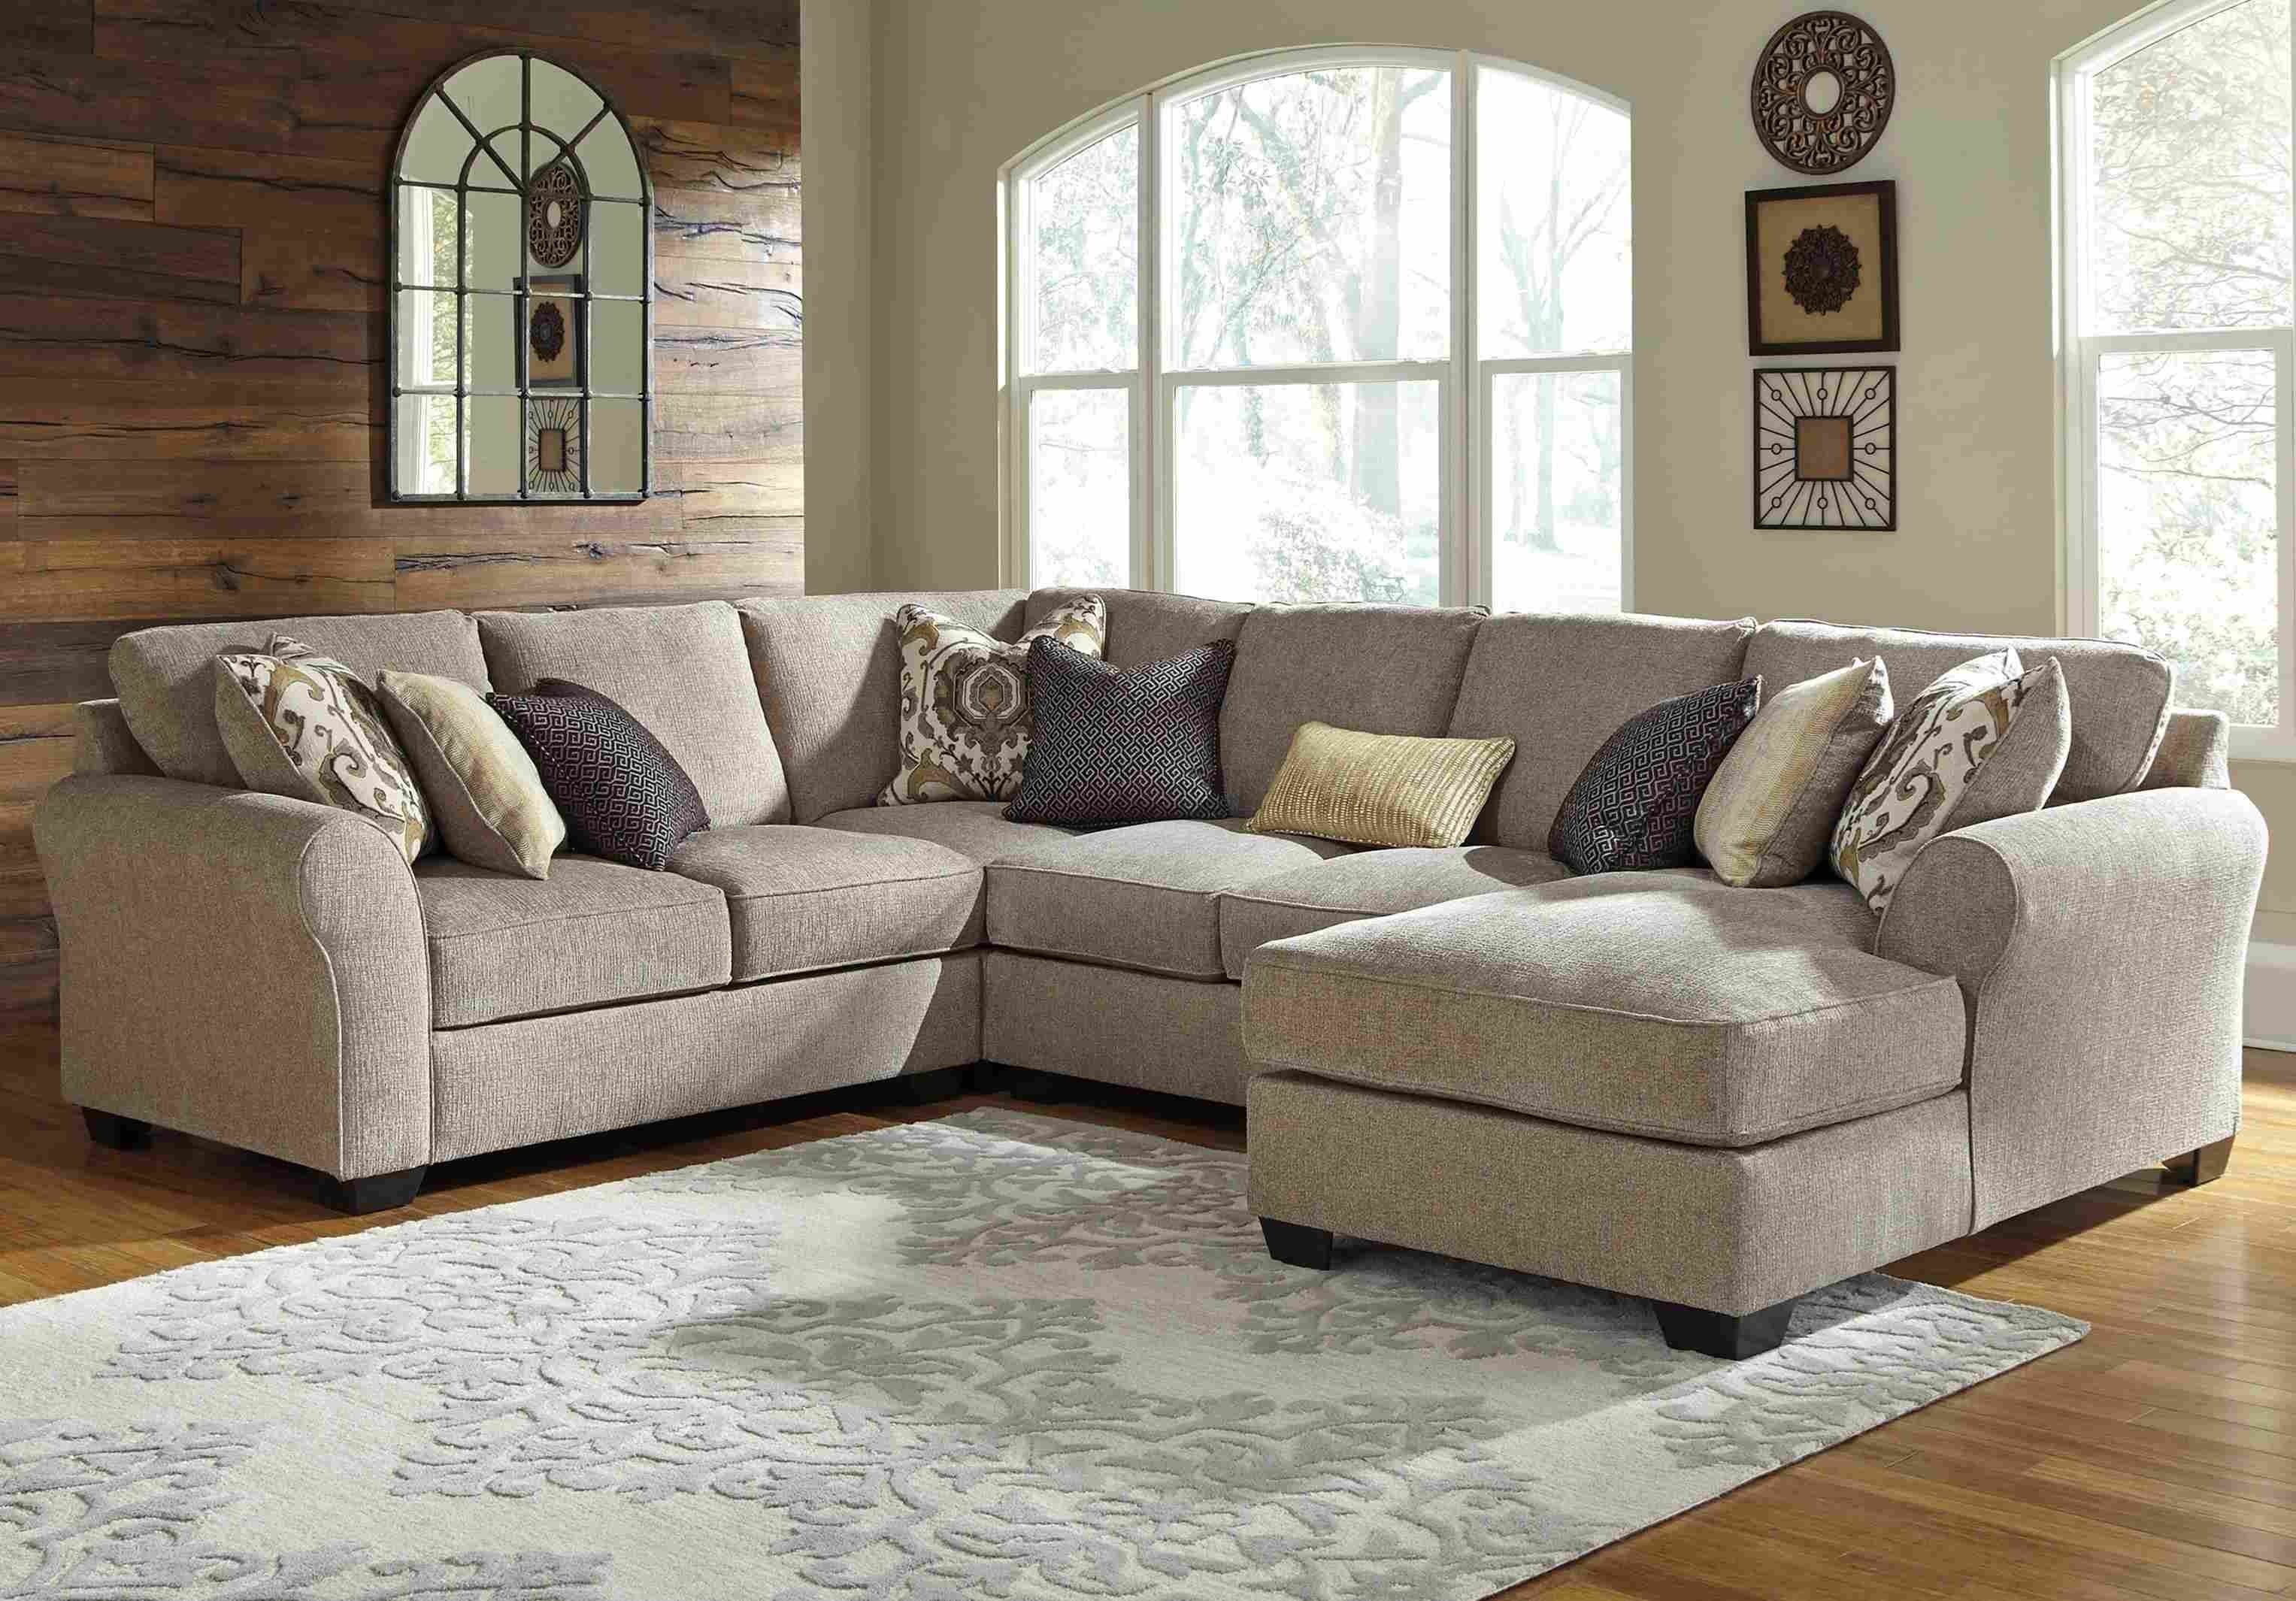 Sofas : Big Sectional Couch Blue Sectional Large Sectional Sectional Throughout Delano 2 Piece Sectionals With Laf Oversized Chaise (View 13 of 30)